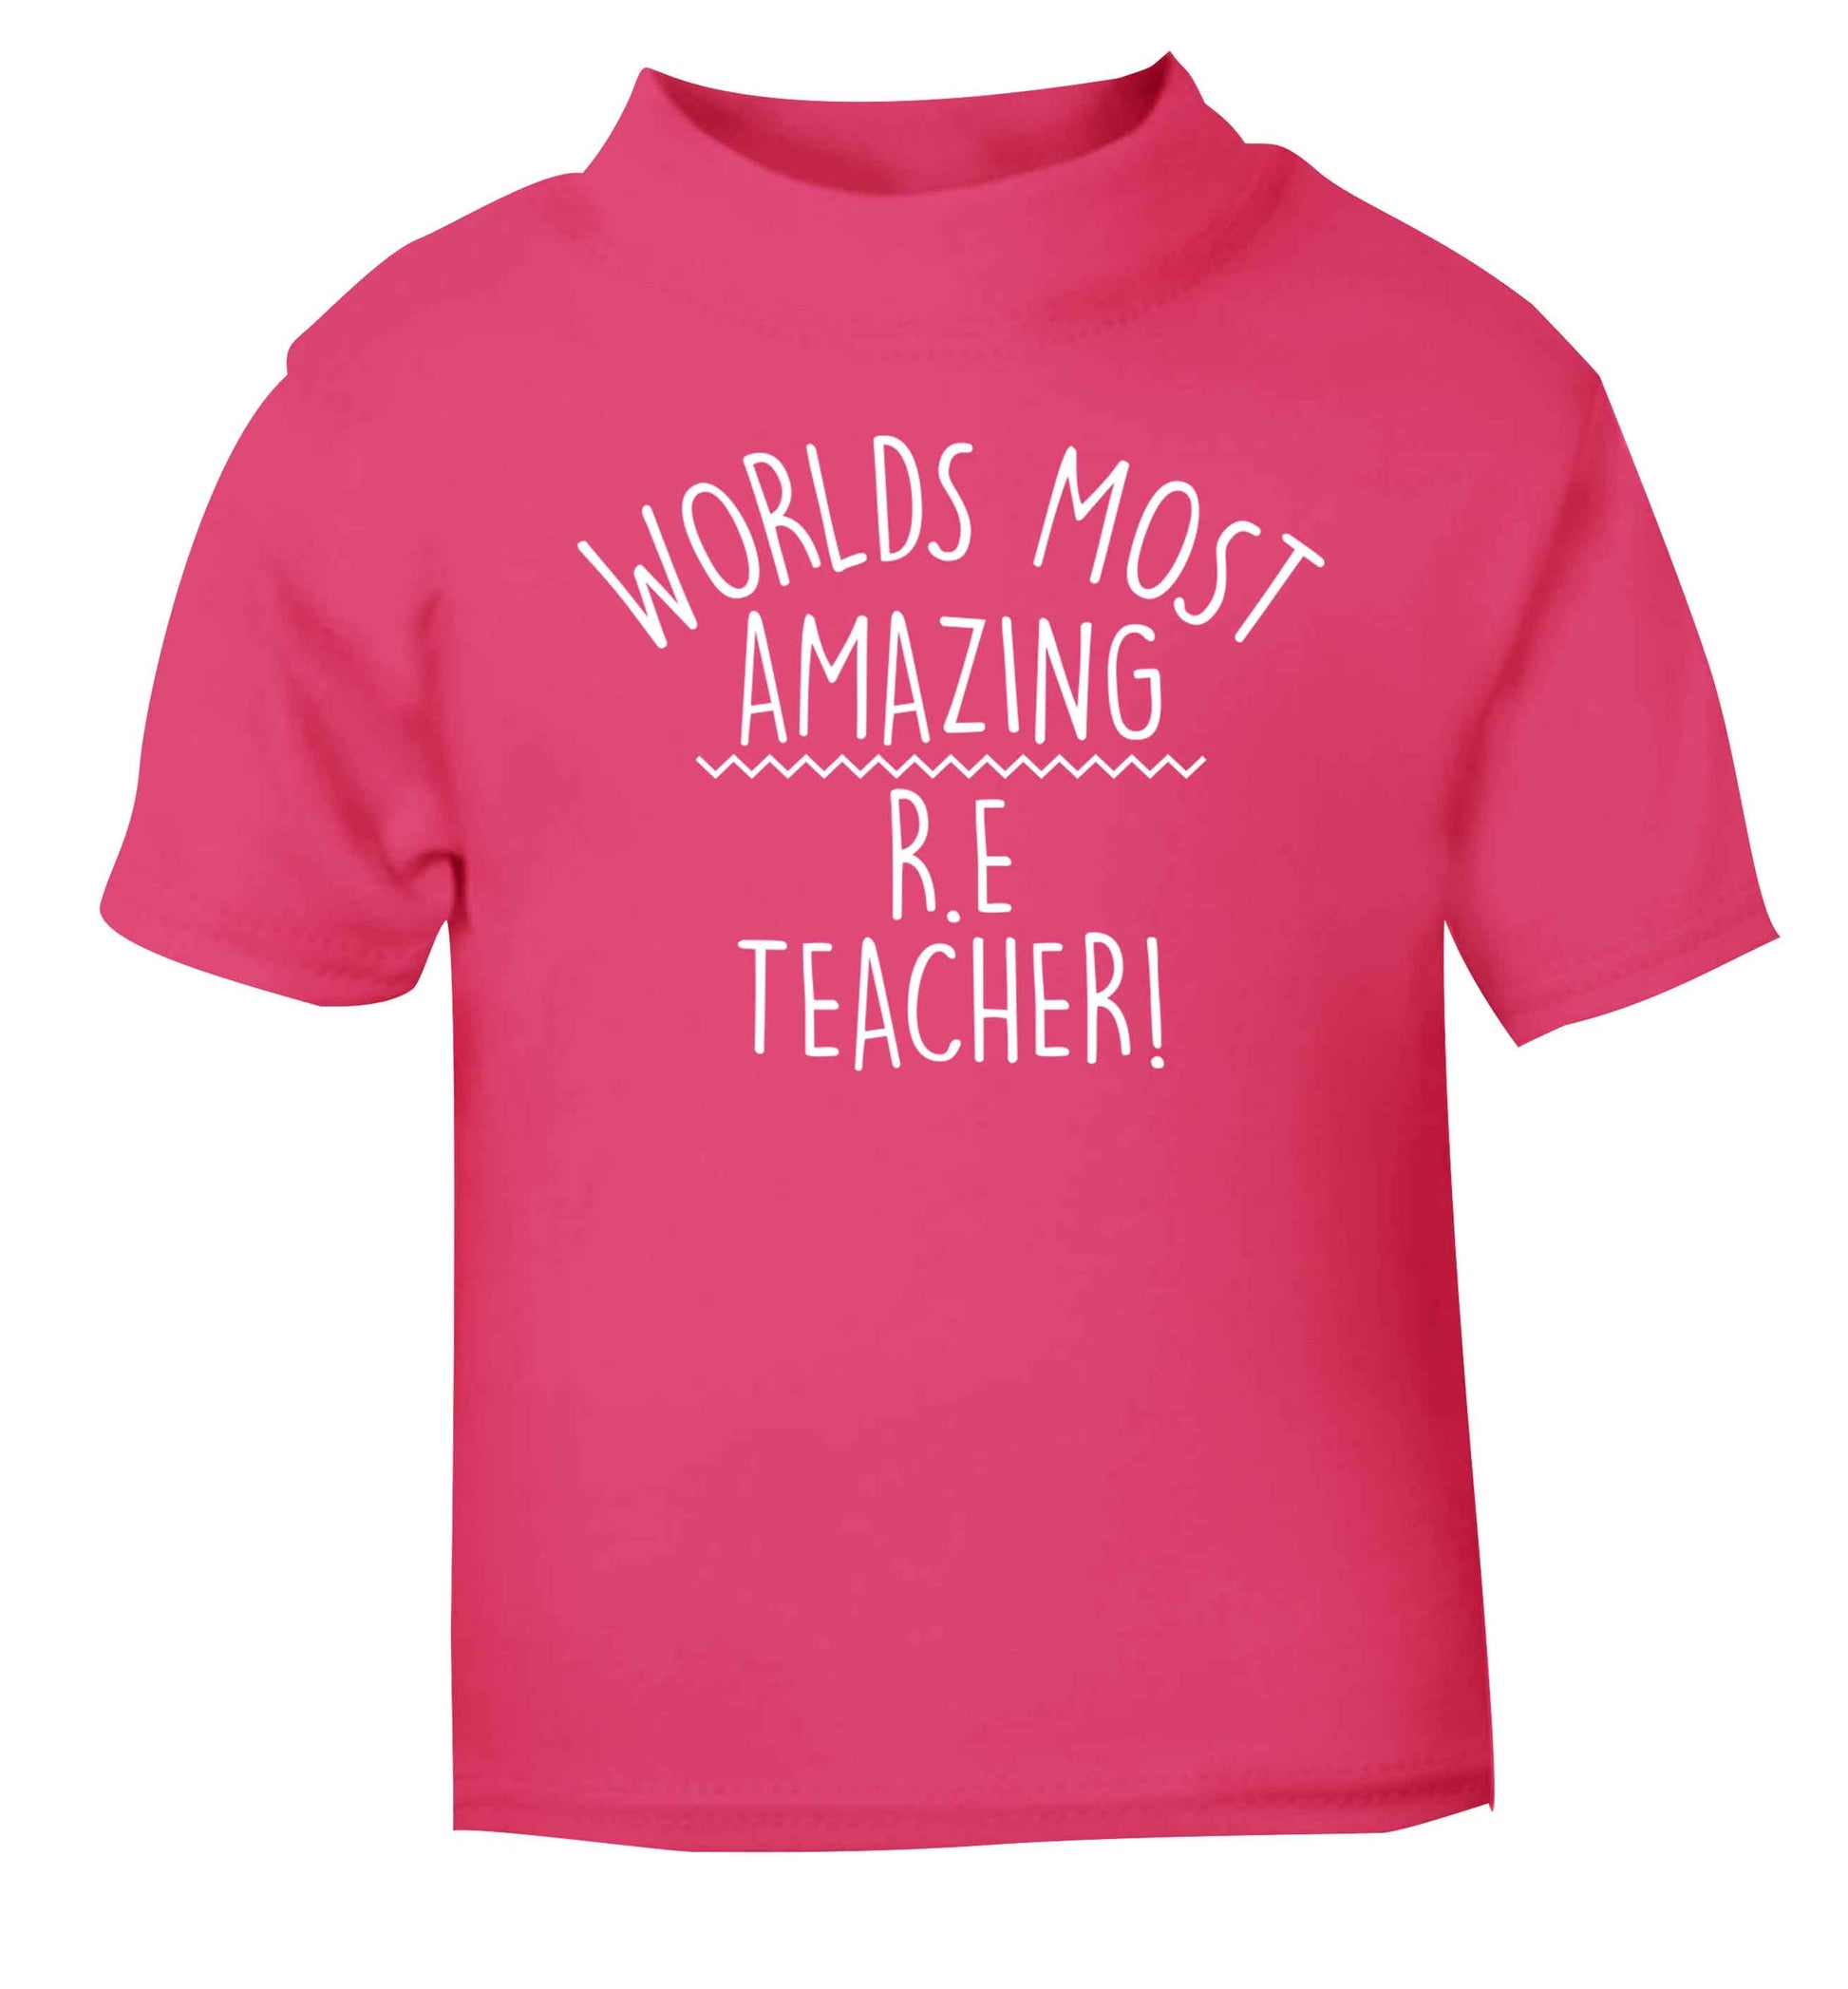 Worlds most amazing R.E teacher pink baby toddler Tshirt 2 Years